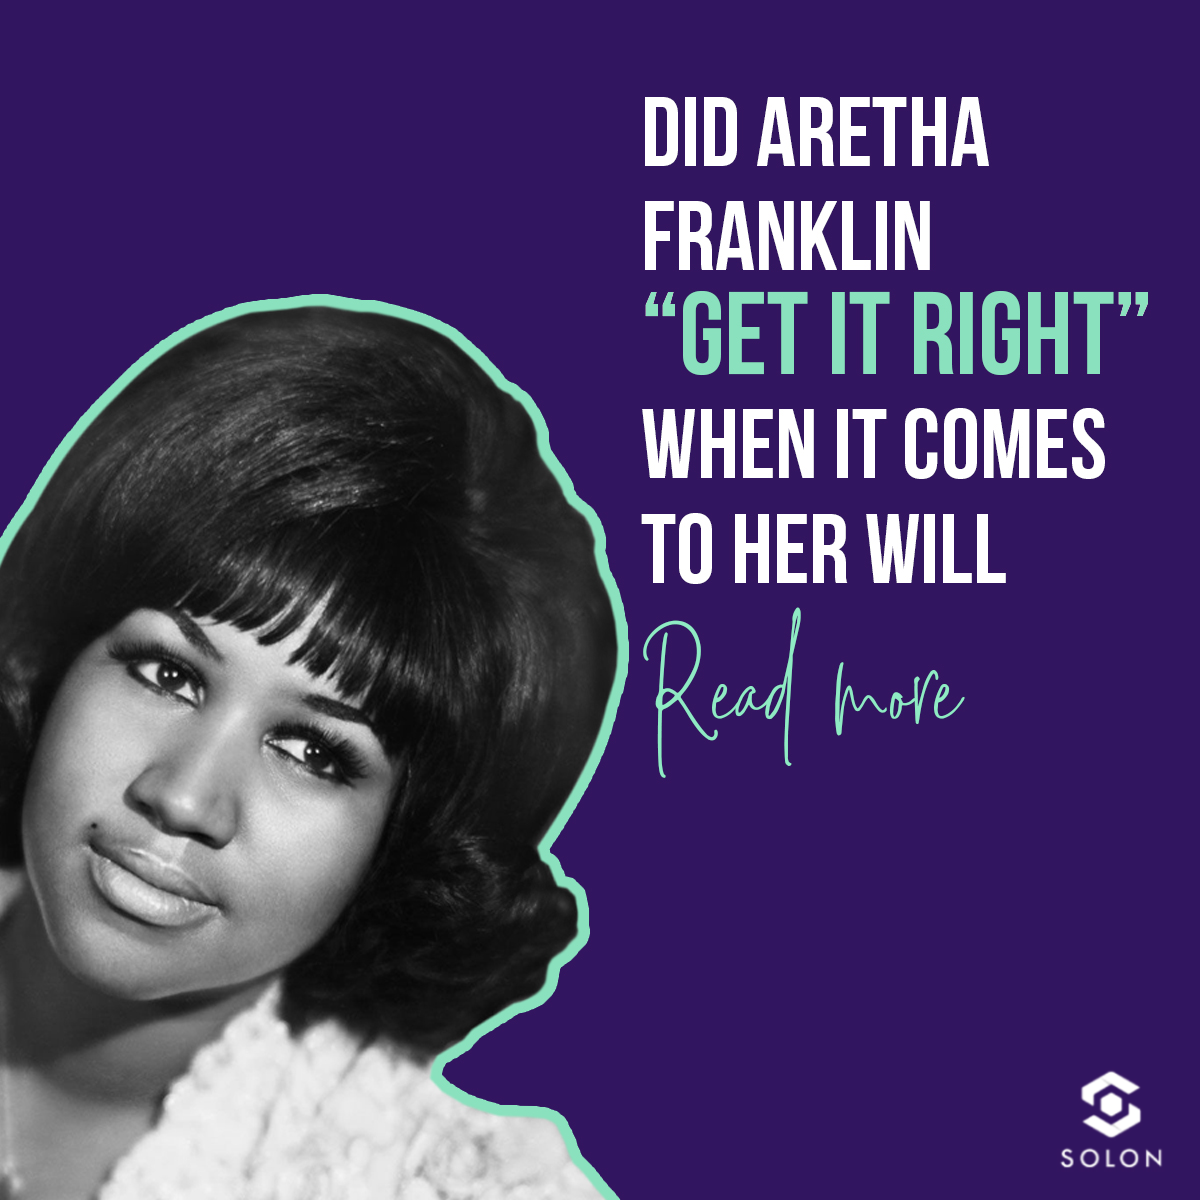 Did Aretha Franklin “Get It Right” when it comes to her Will